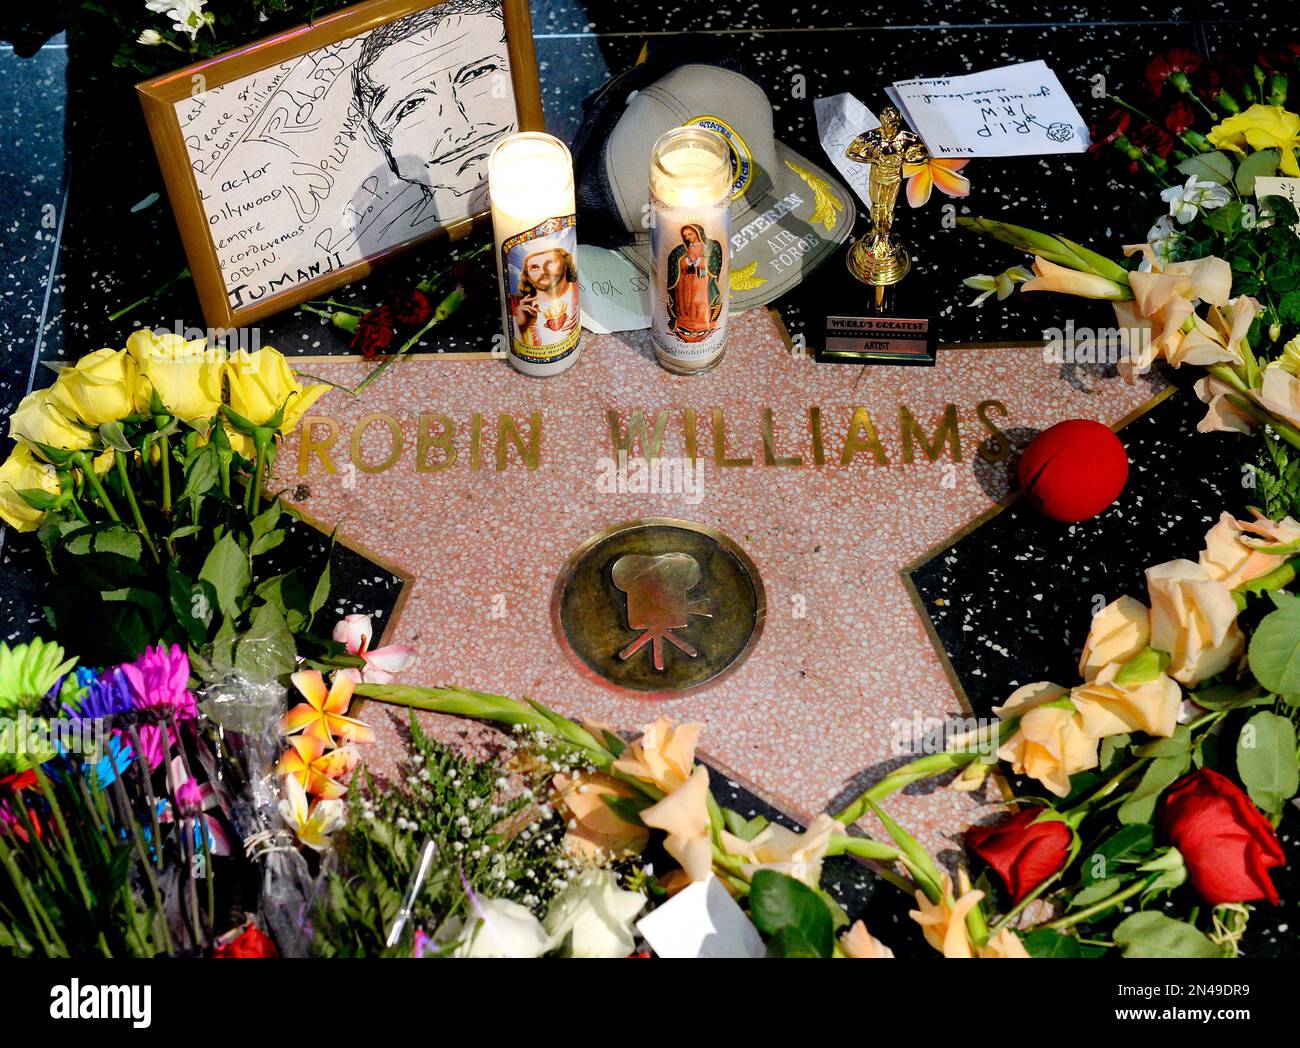 Flowers are placed in memory of actor/comedian Robin Williams on